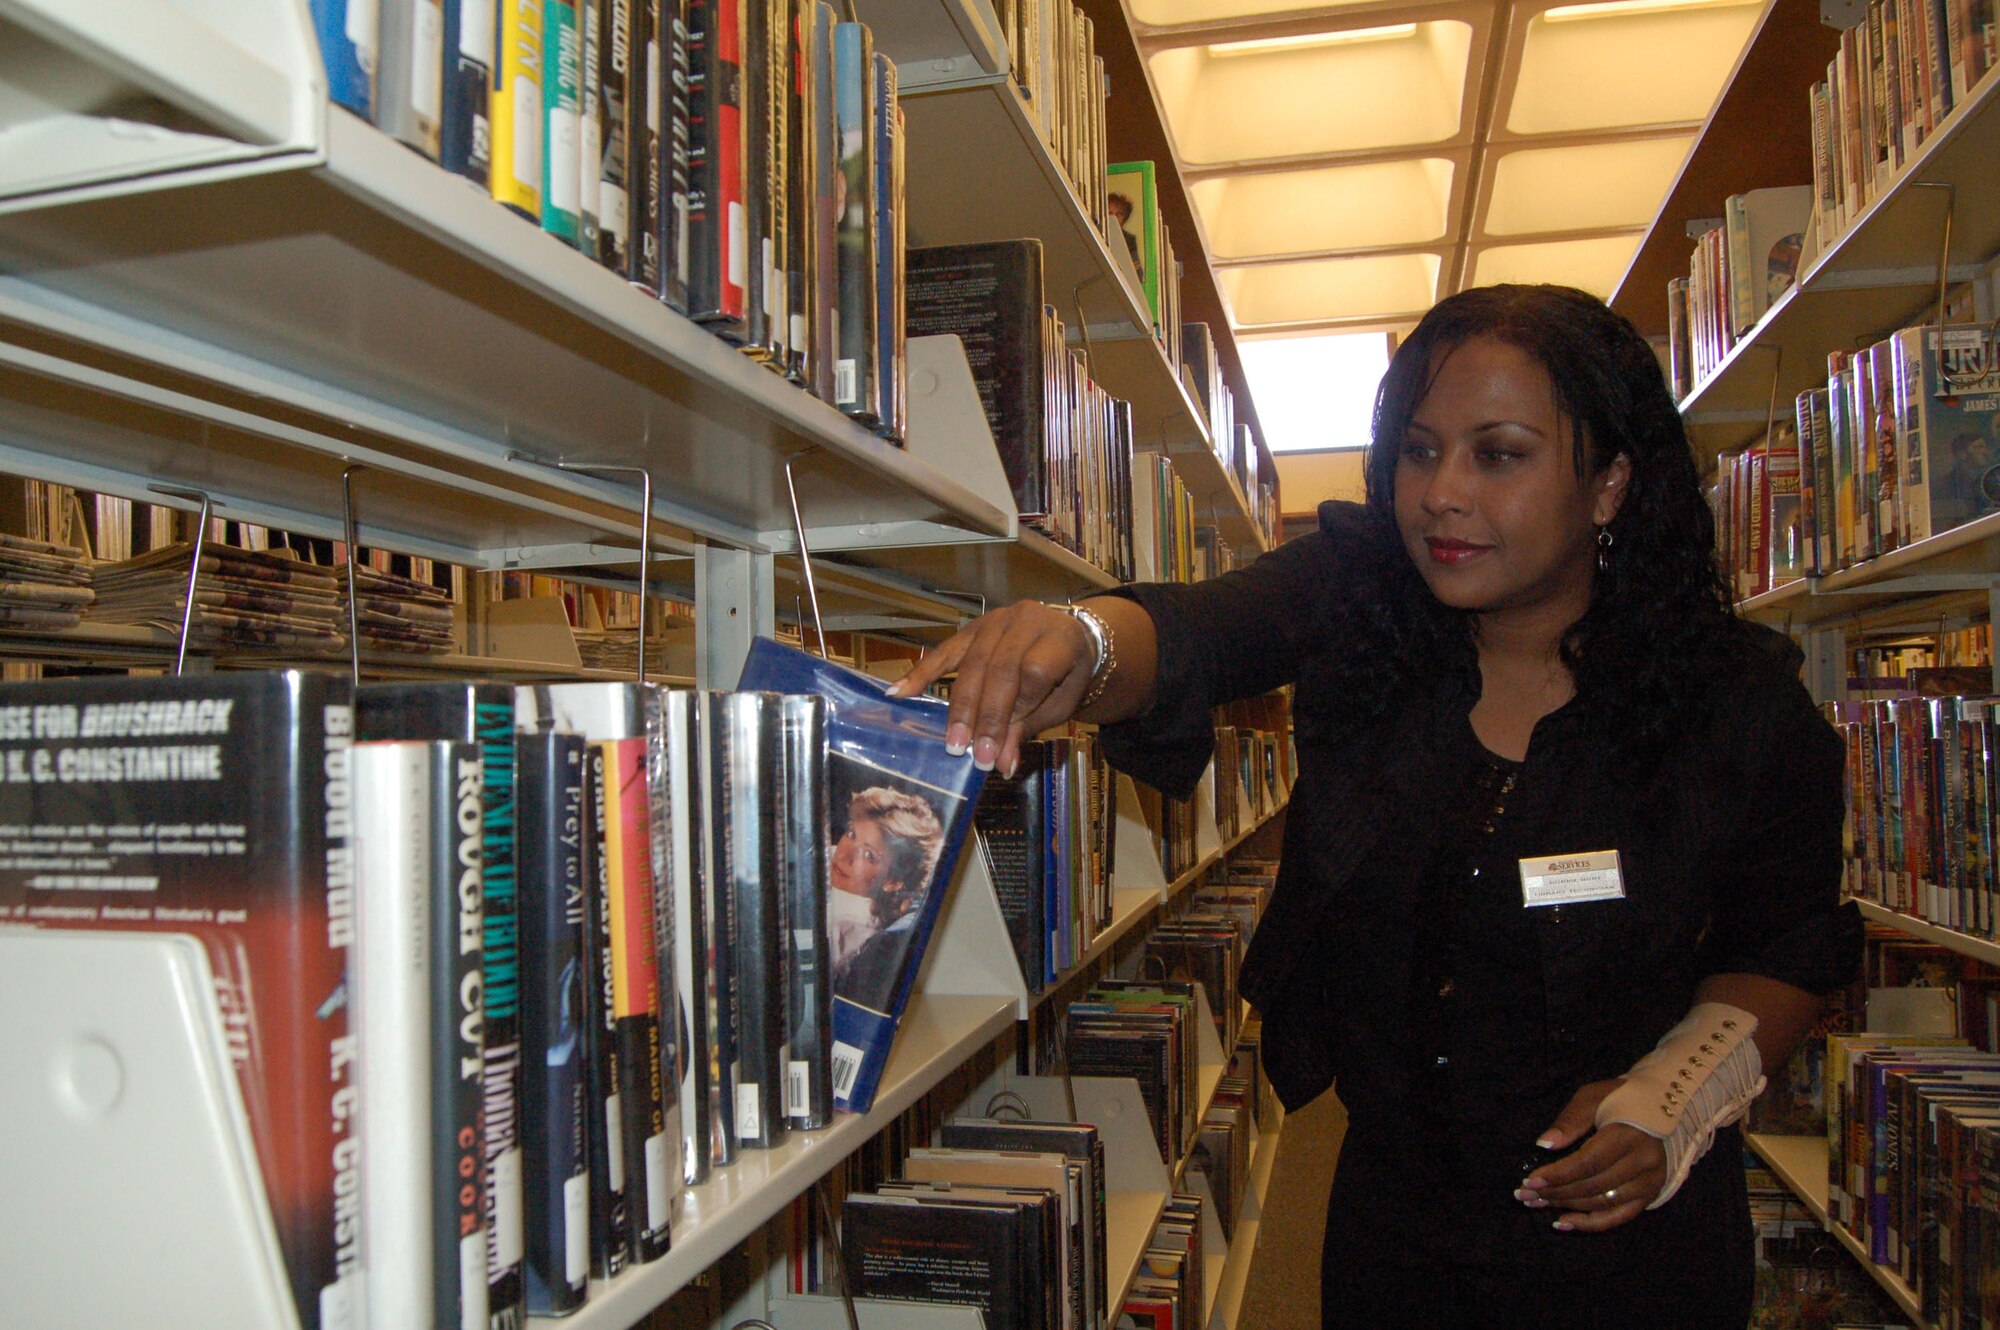 Peronica Hunt, Edwards Library technician, organizes books on a shelf. The Edwards Main Library achieved a five-star rating from the Air Force recently for the third consecutive time. The library was also the best in Air Force Materiel Command for fourth year in a row. (Photo by Airman 1st Class Julius Delos Reyes)